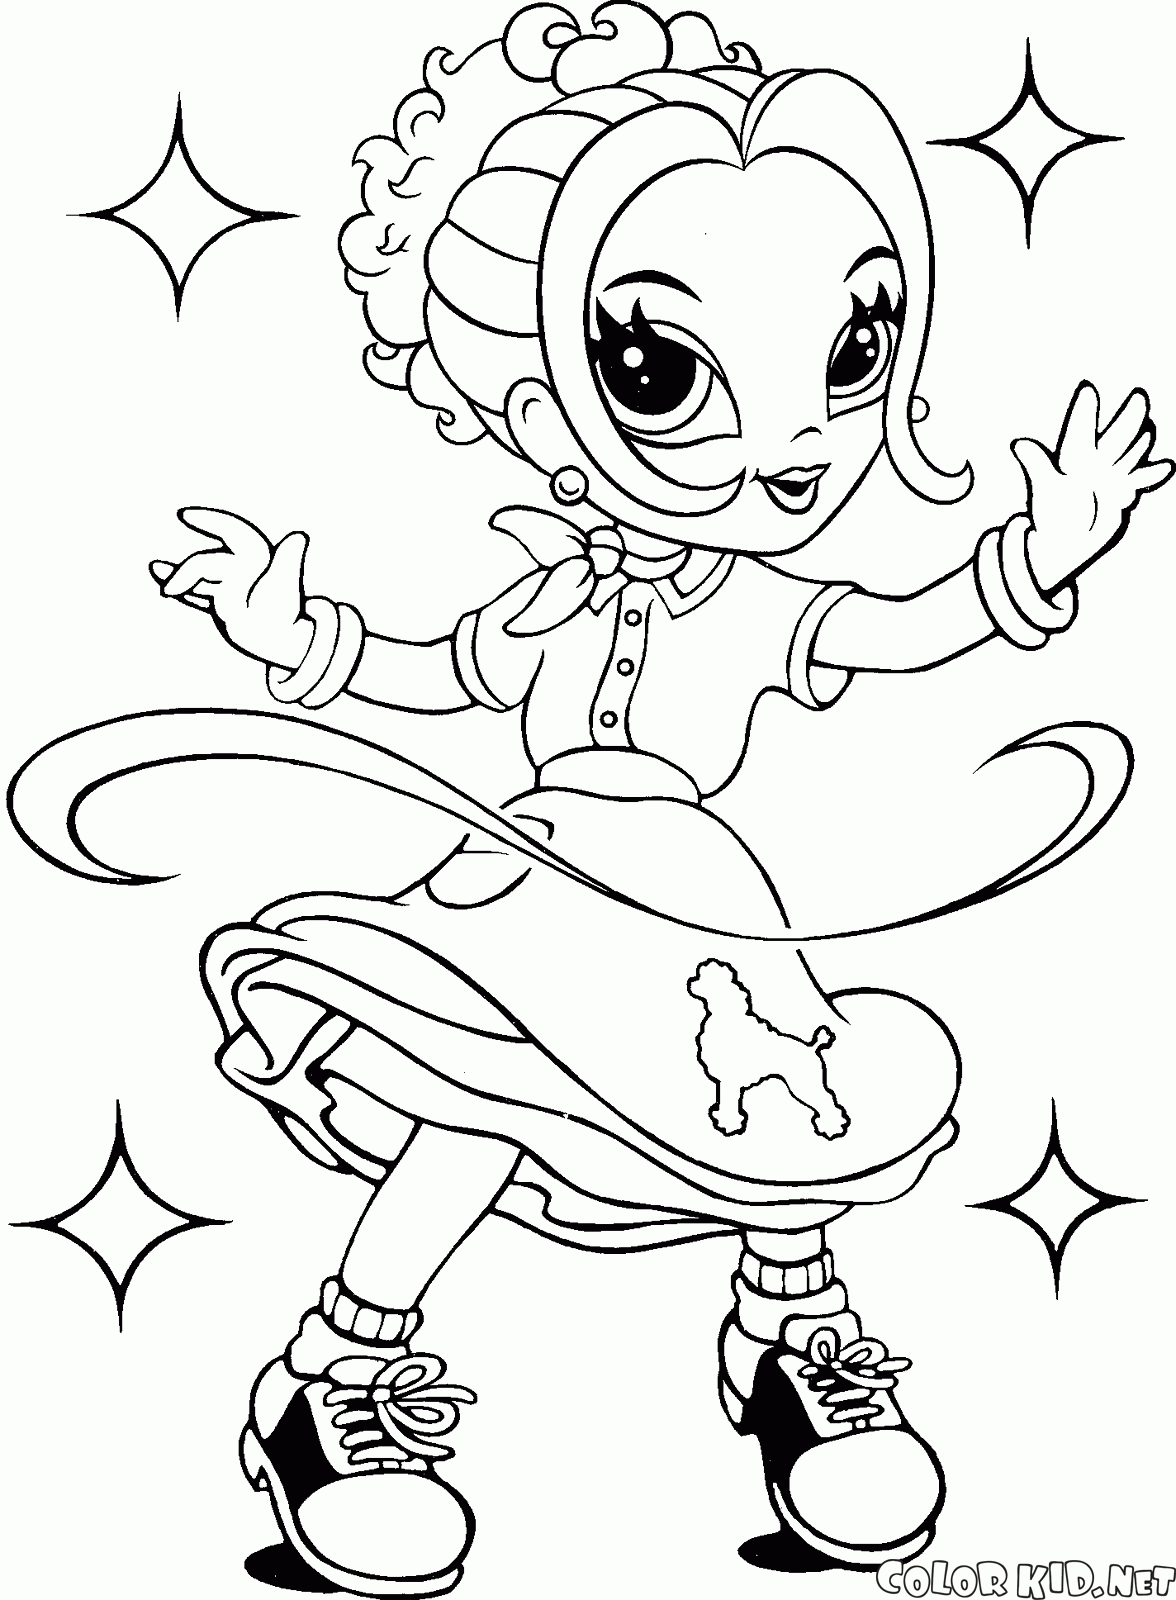 Coloring page - Girls dance